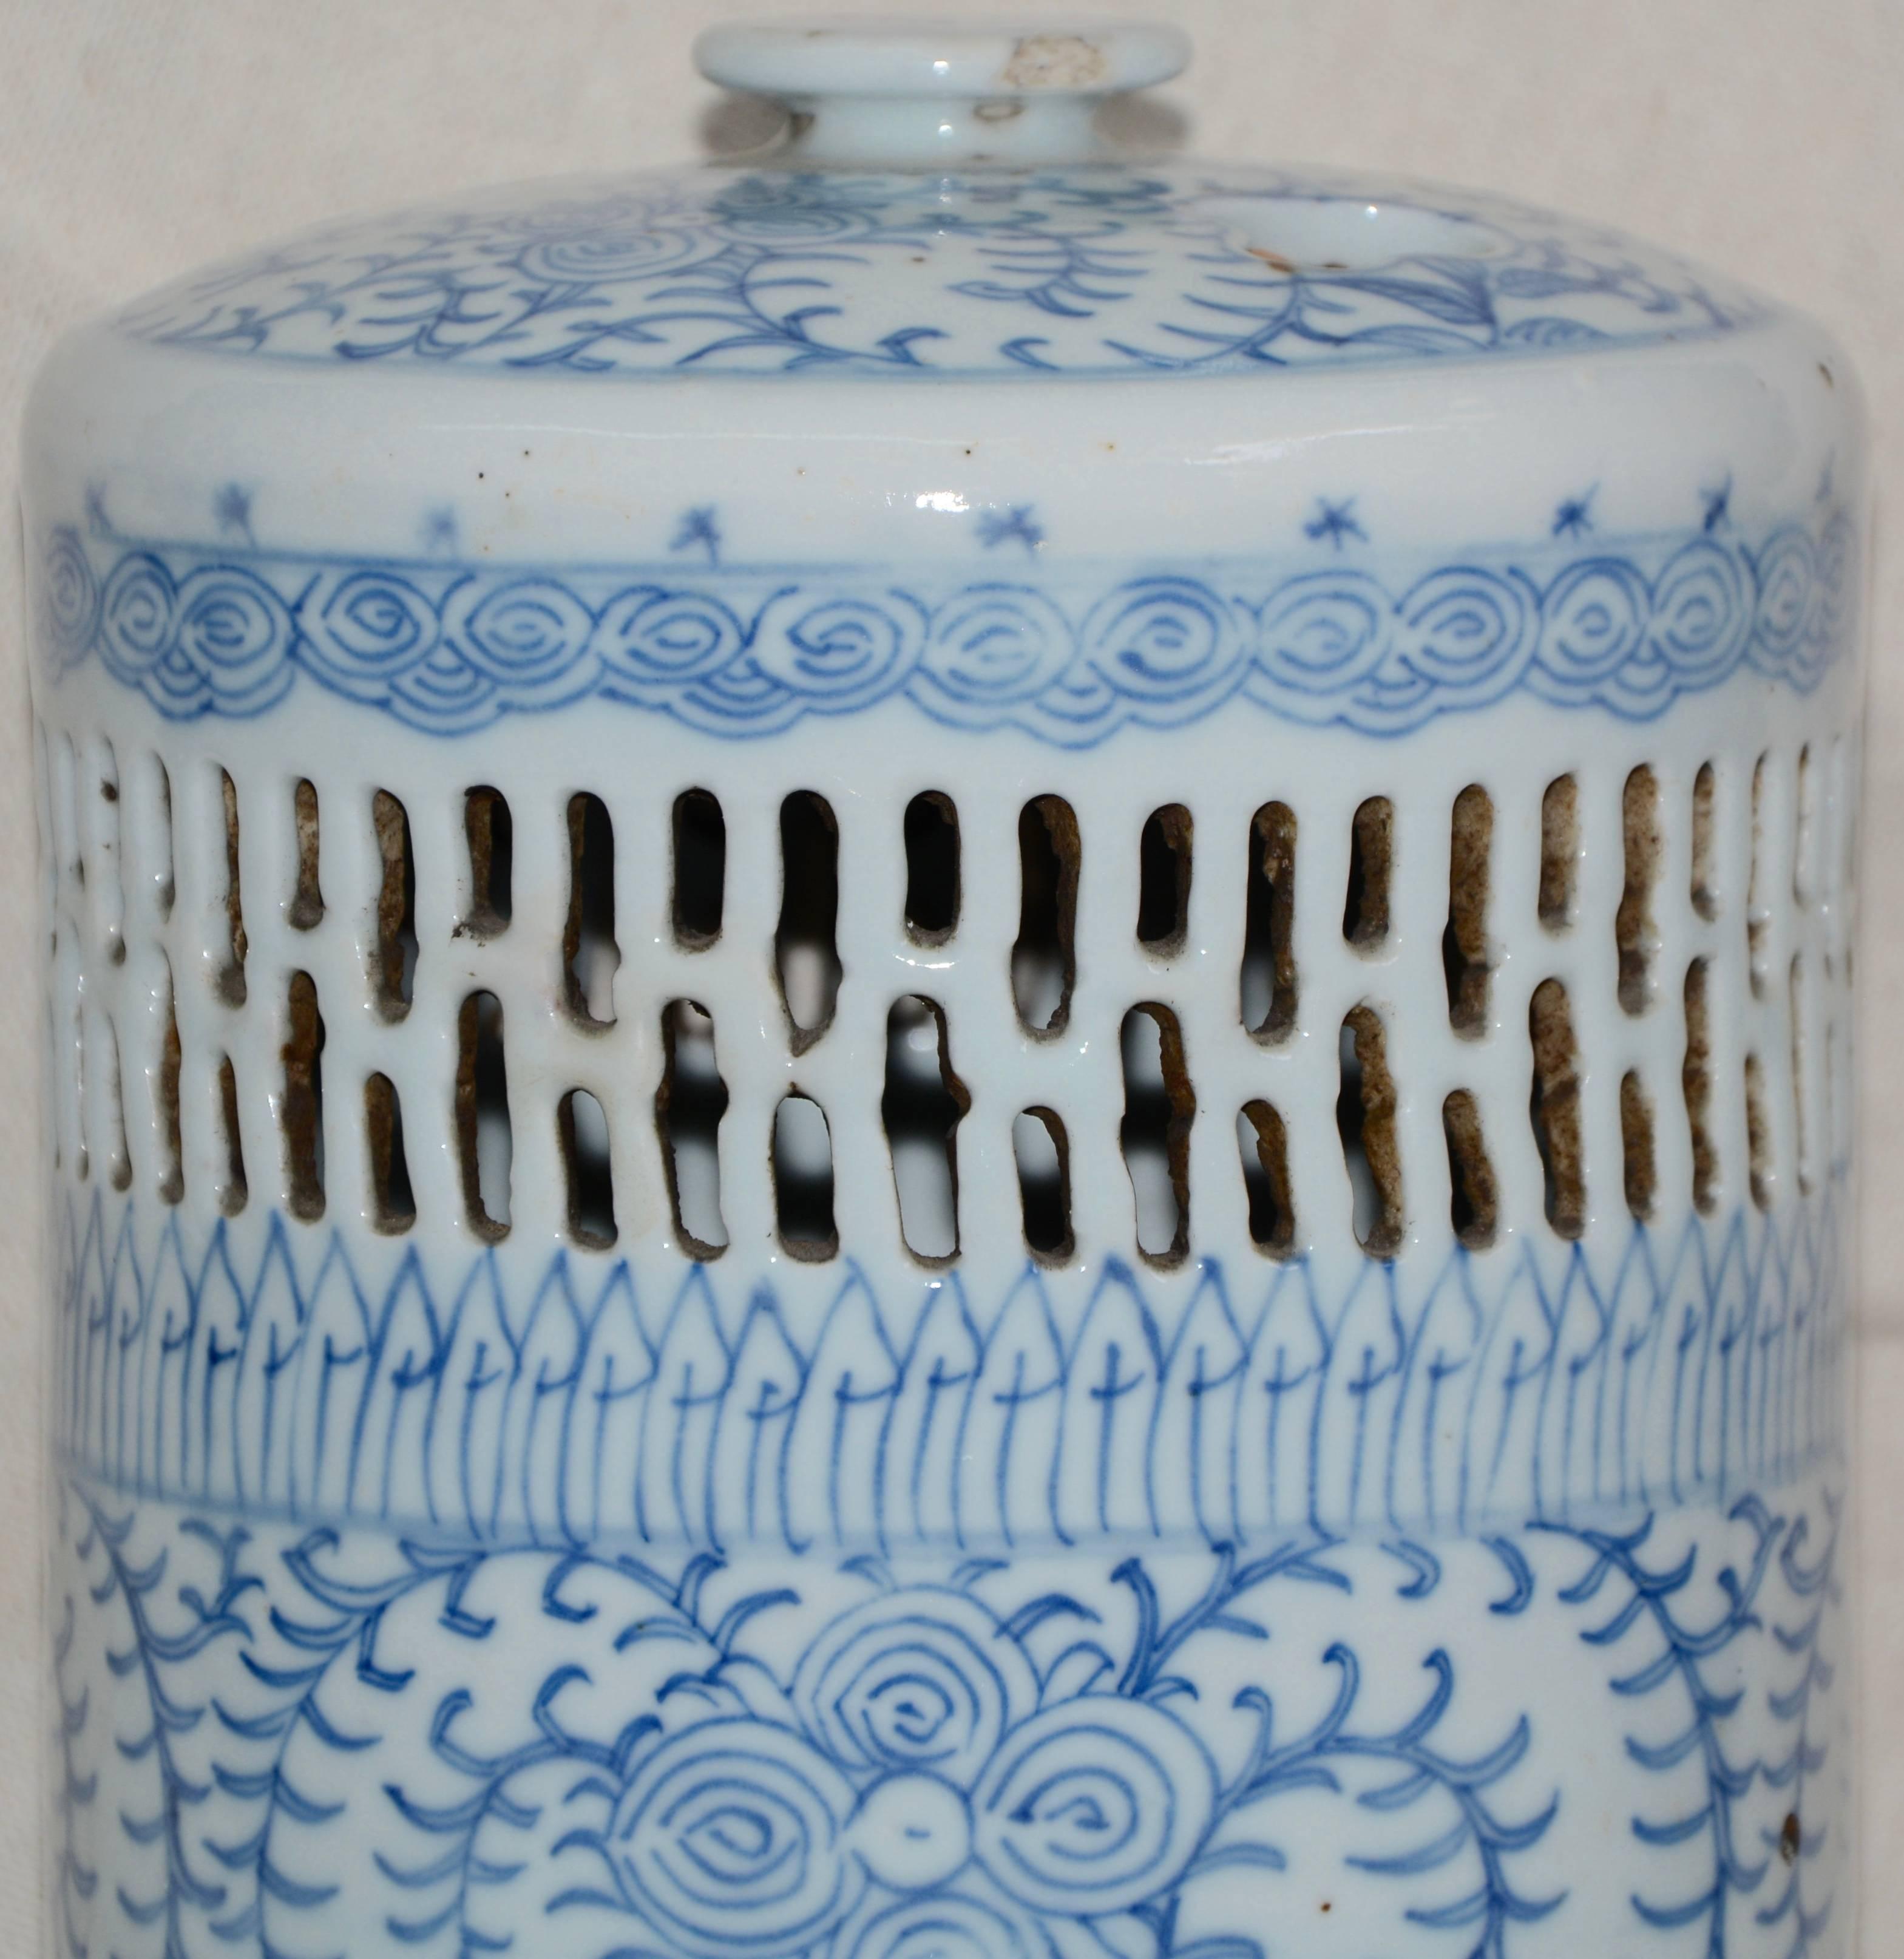 Chinese Blue and White Asian Pierced Ceramic Incense Burner, 20th Century For Sale